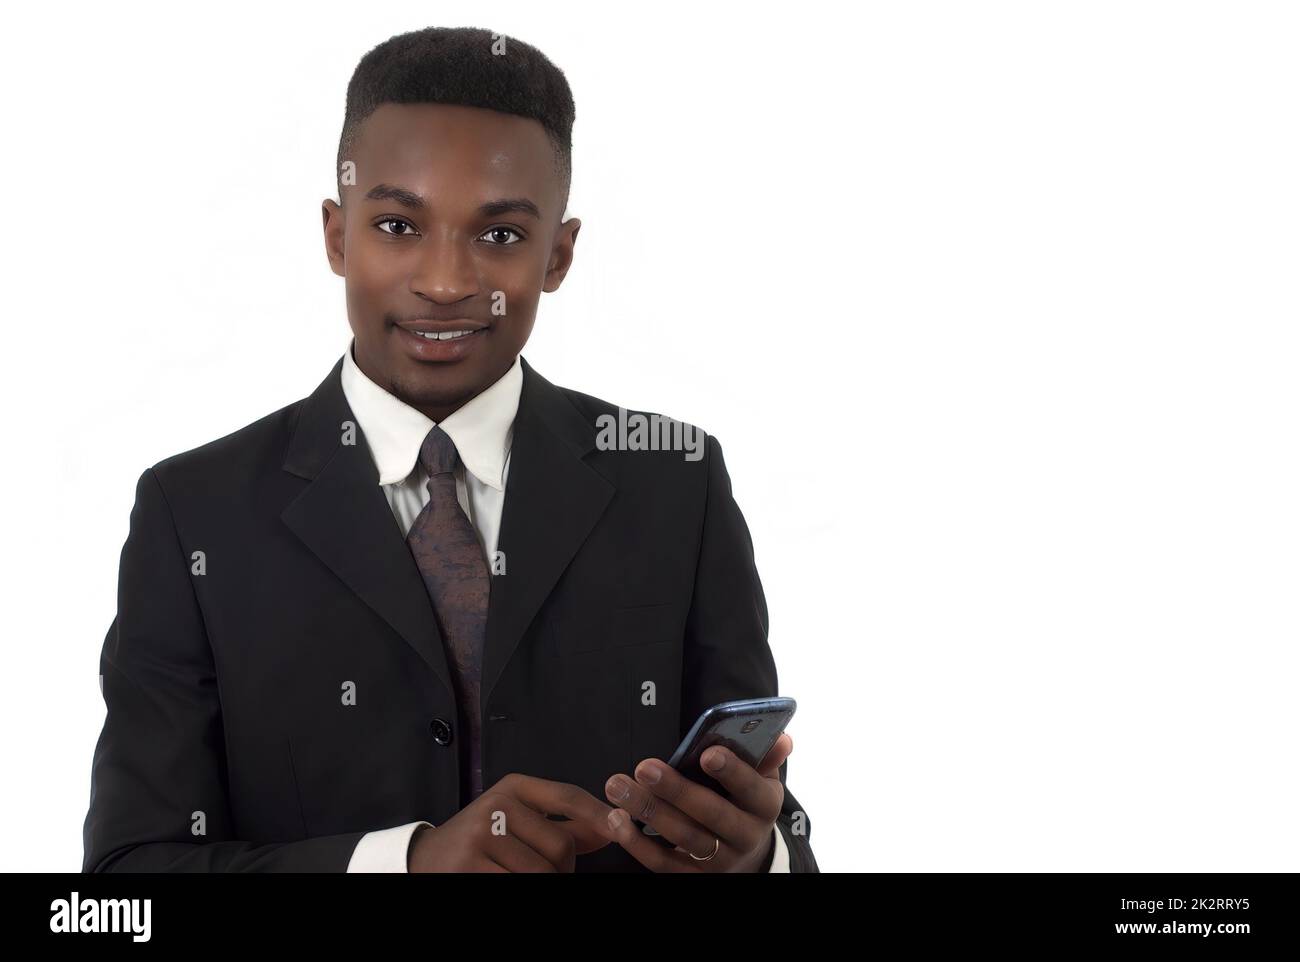 young man holding cellular phone technology suit and tie businessman on white background Stock Photo